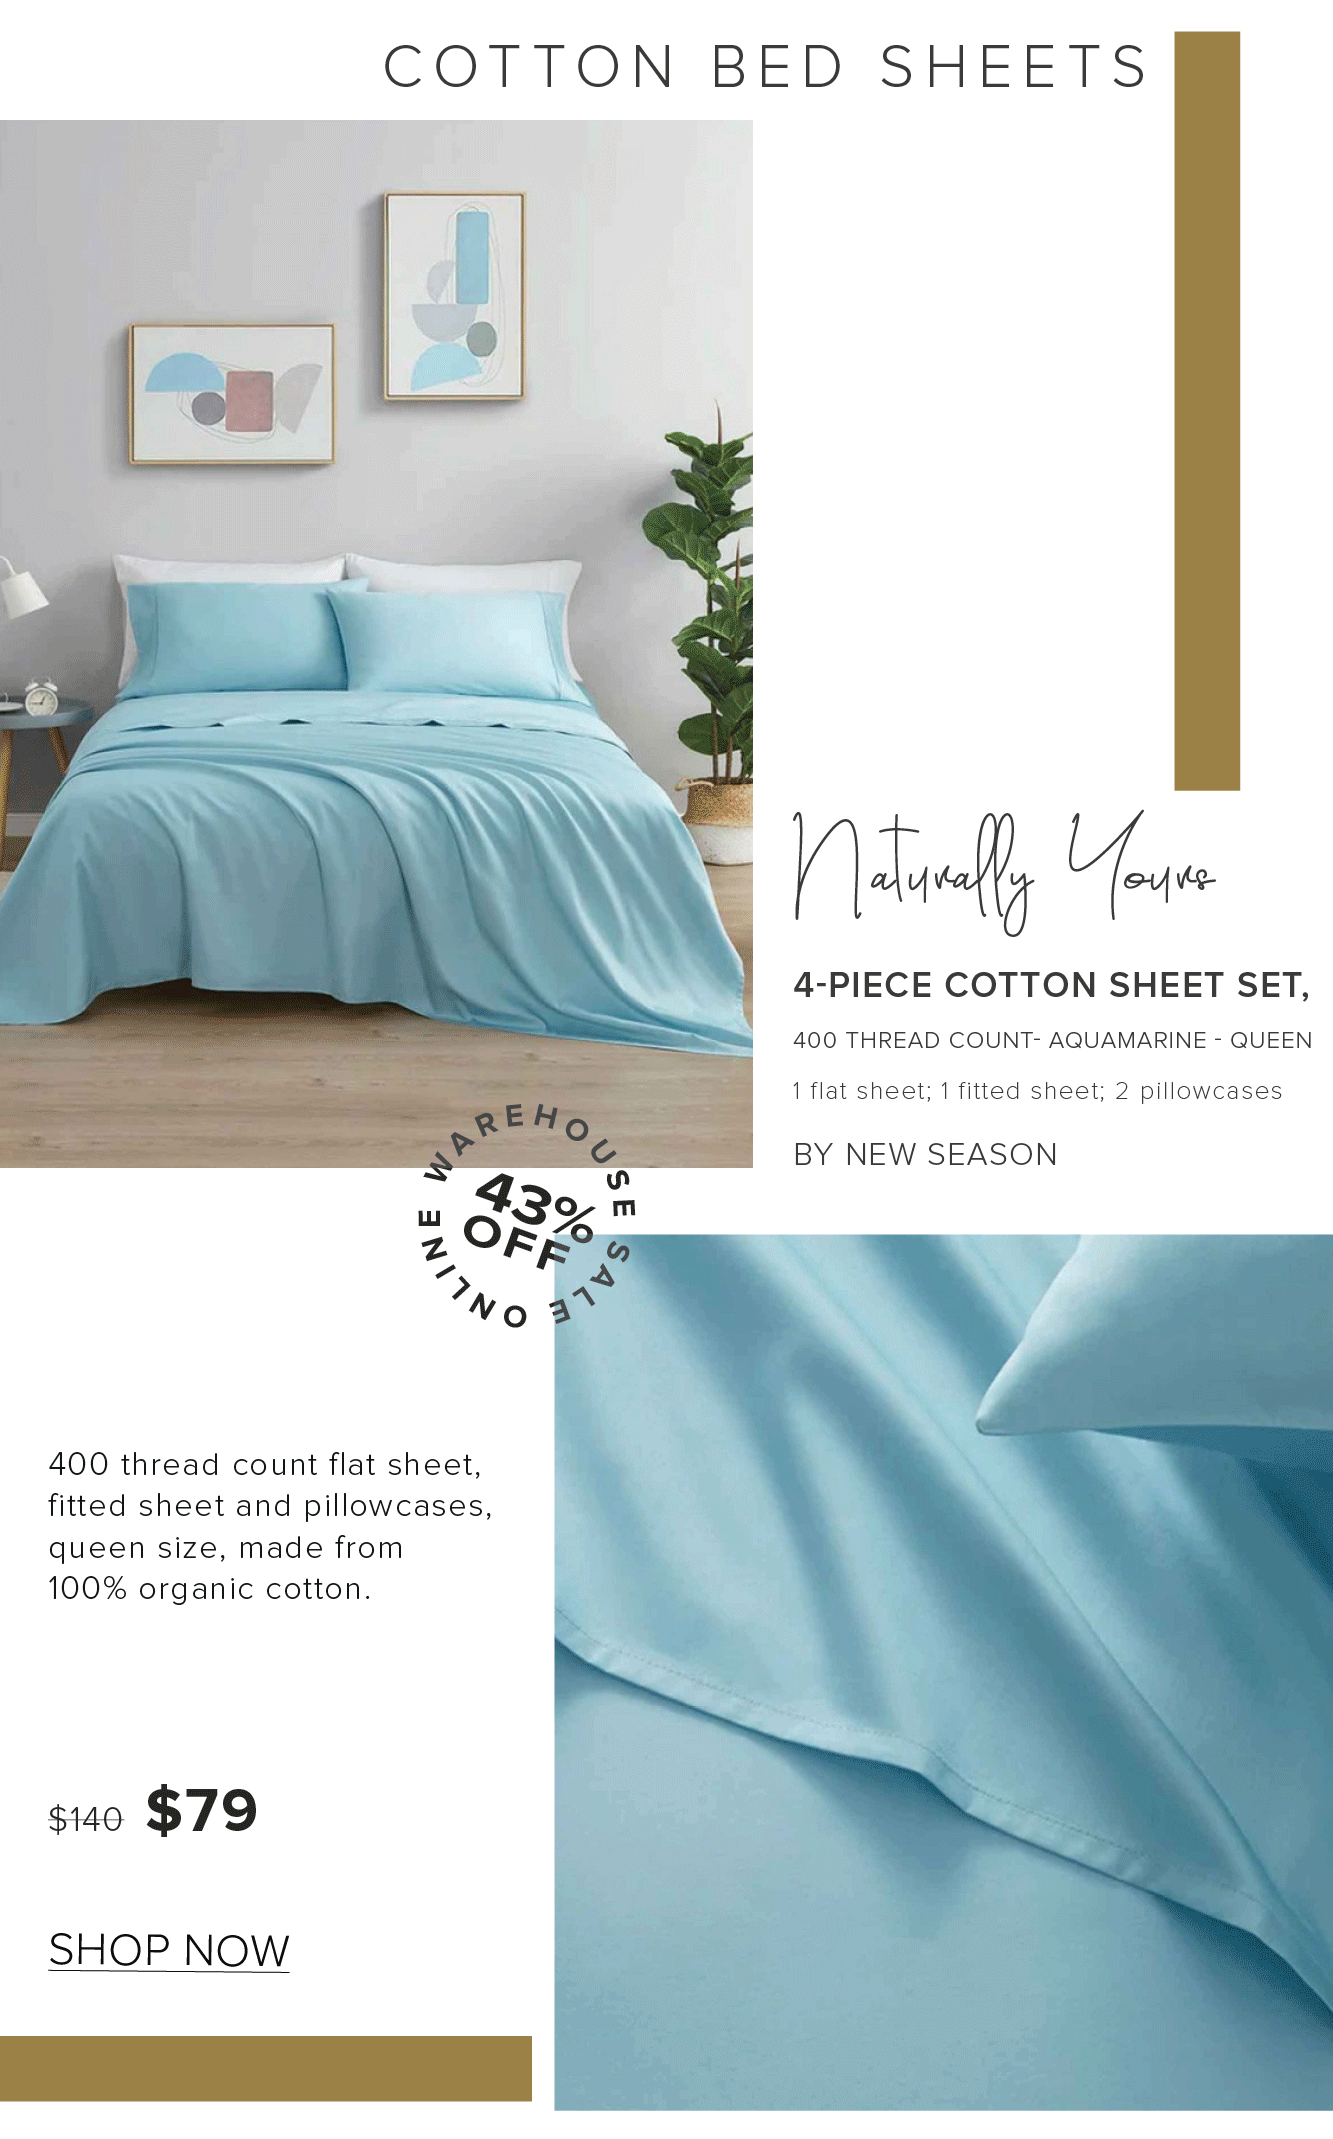 COTTON BED SHEETS V Foelly o 4-PIECE COTTON SHEET SET, 400 THREAD COUNT- AQUAMARINE - QUEEN 1 flat sheet; 1 fitted sheet; 2 pillowcases BY NEW SEASON w 330 ' 2 OFiy 4 A 400 thread count flat sheet, fitted sheet and pillowcases, queen size, made from 100% organic cotton. s120 $79 SHOP NOW 